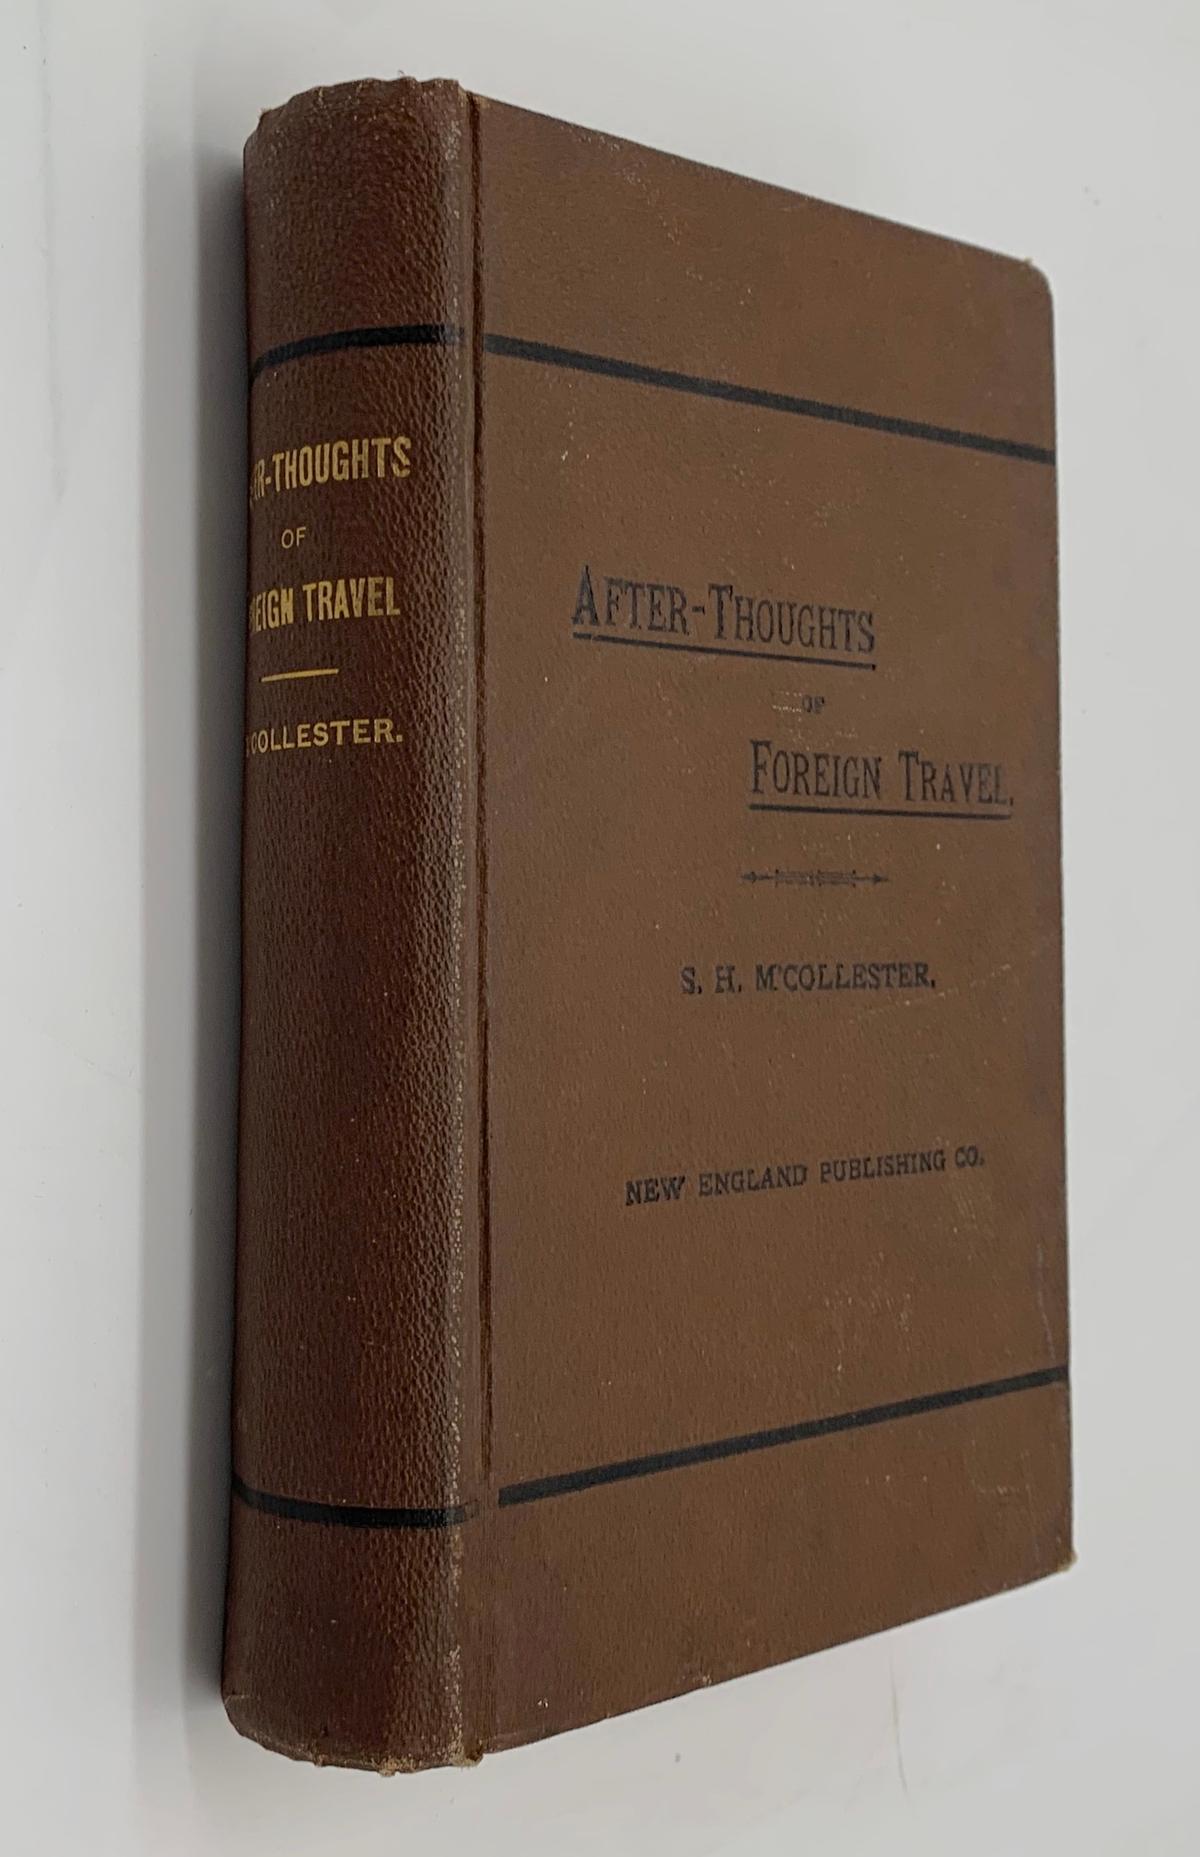 AFTER-THOUGHTS OF FOREIGN TRAVEL (1882) In Historic Lands And Capital Cities